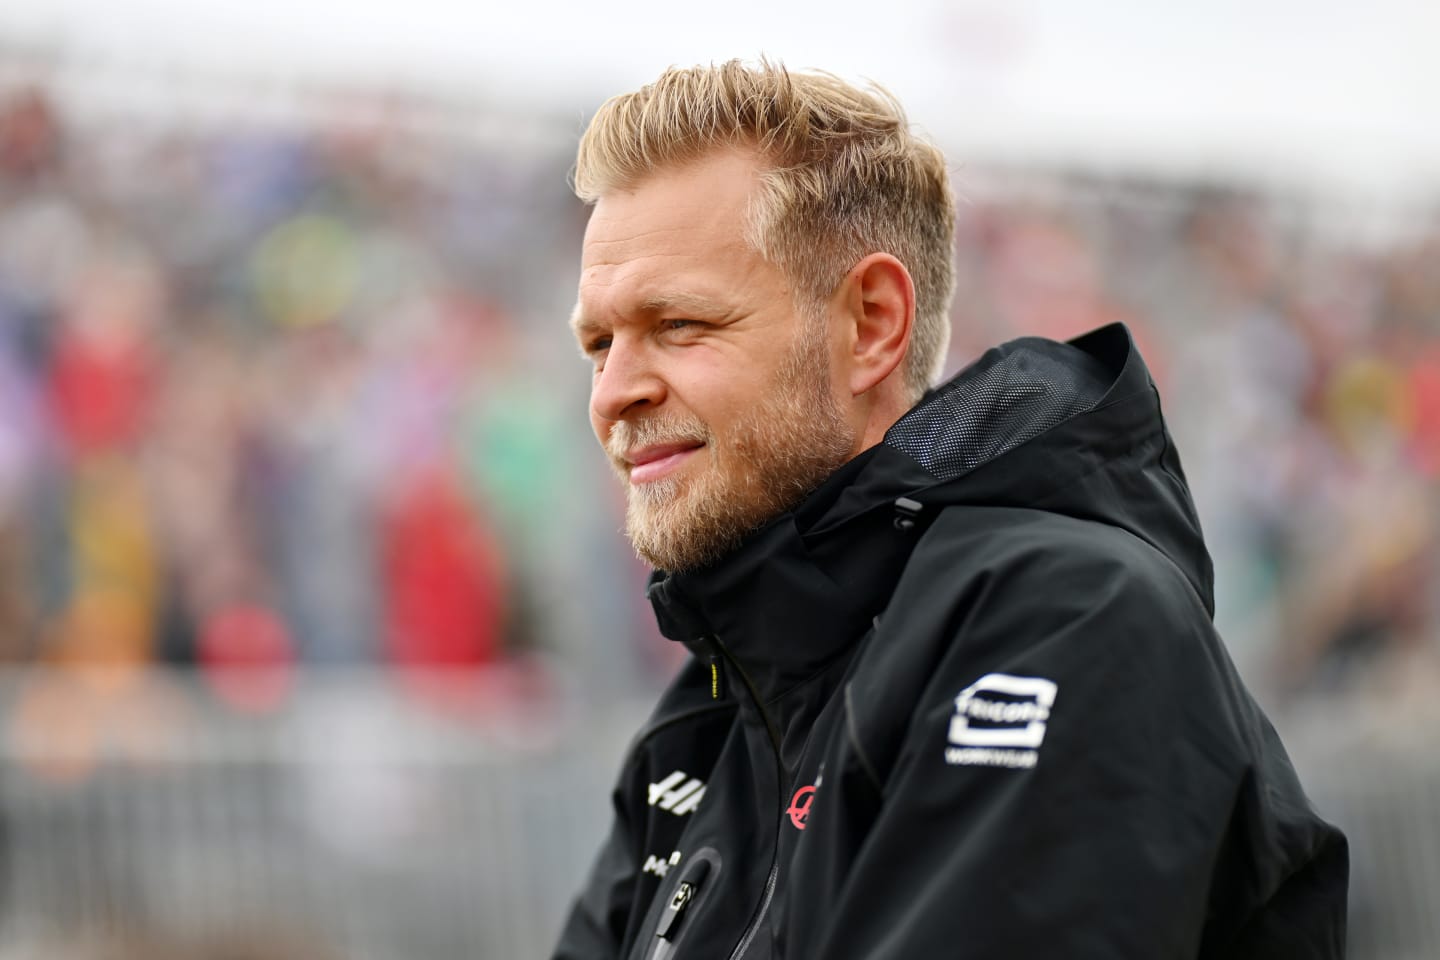 MONTREAL, QUEBEC - JUNE 18: Kevin Magnussen of Denmark and Haas F1 looks on from the drivers parade